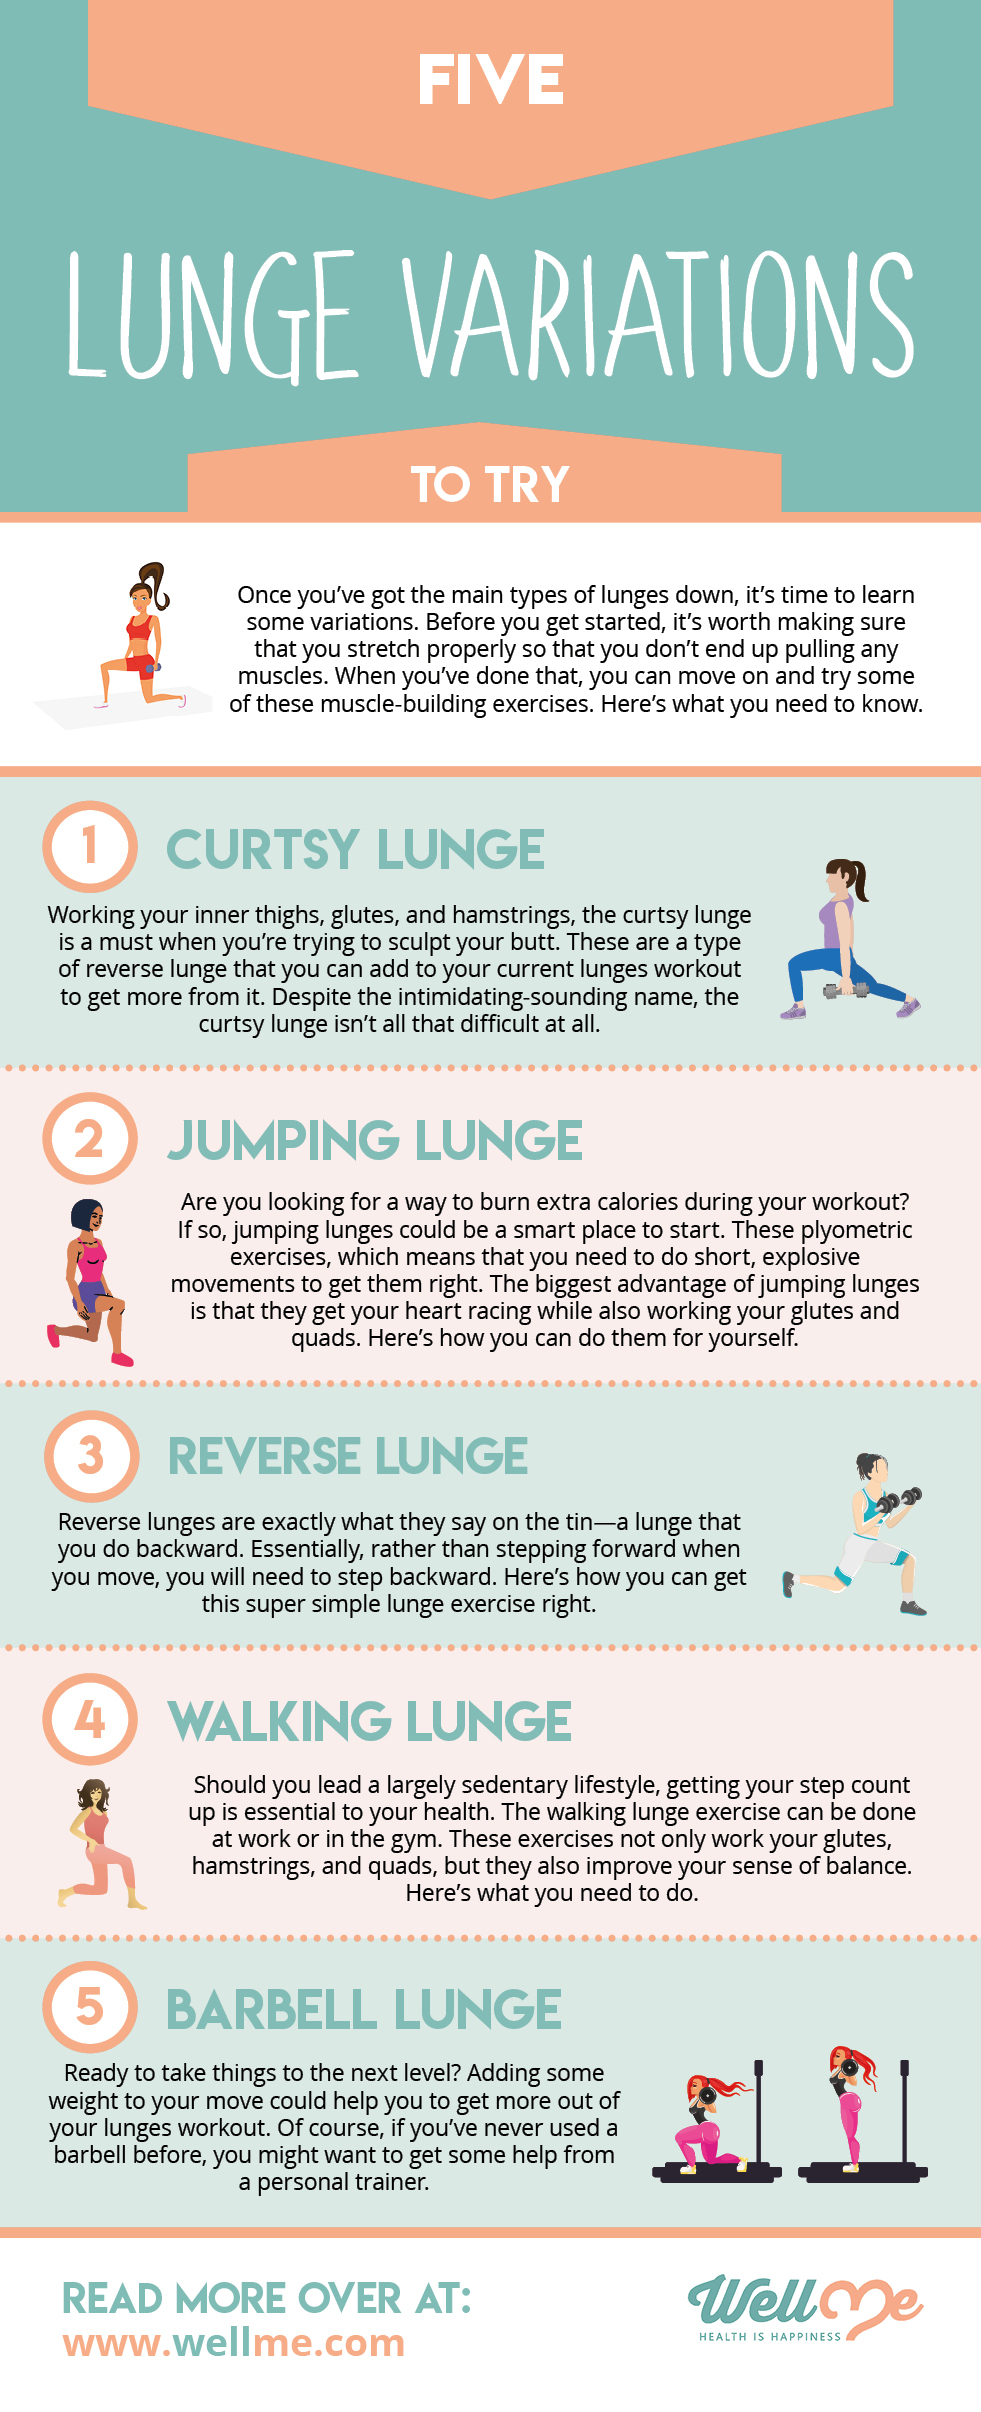 Five Lunge Variations to Try Infographic